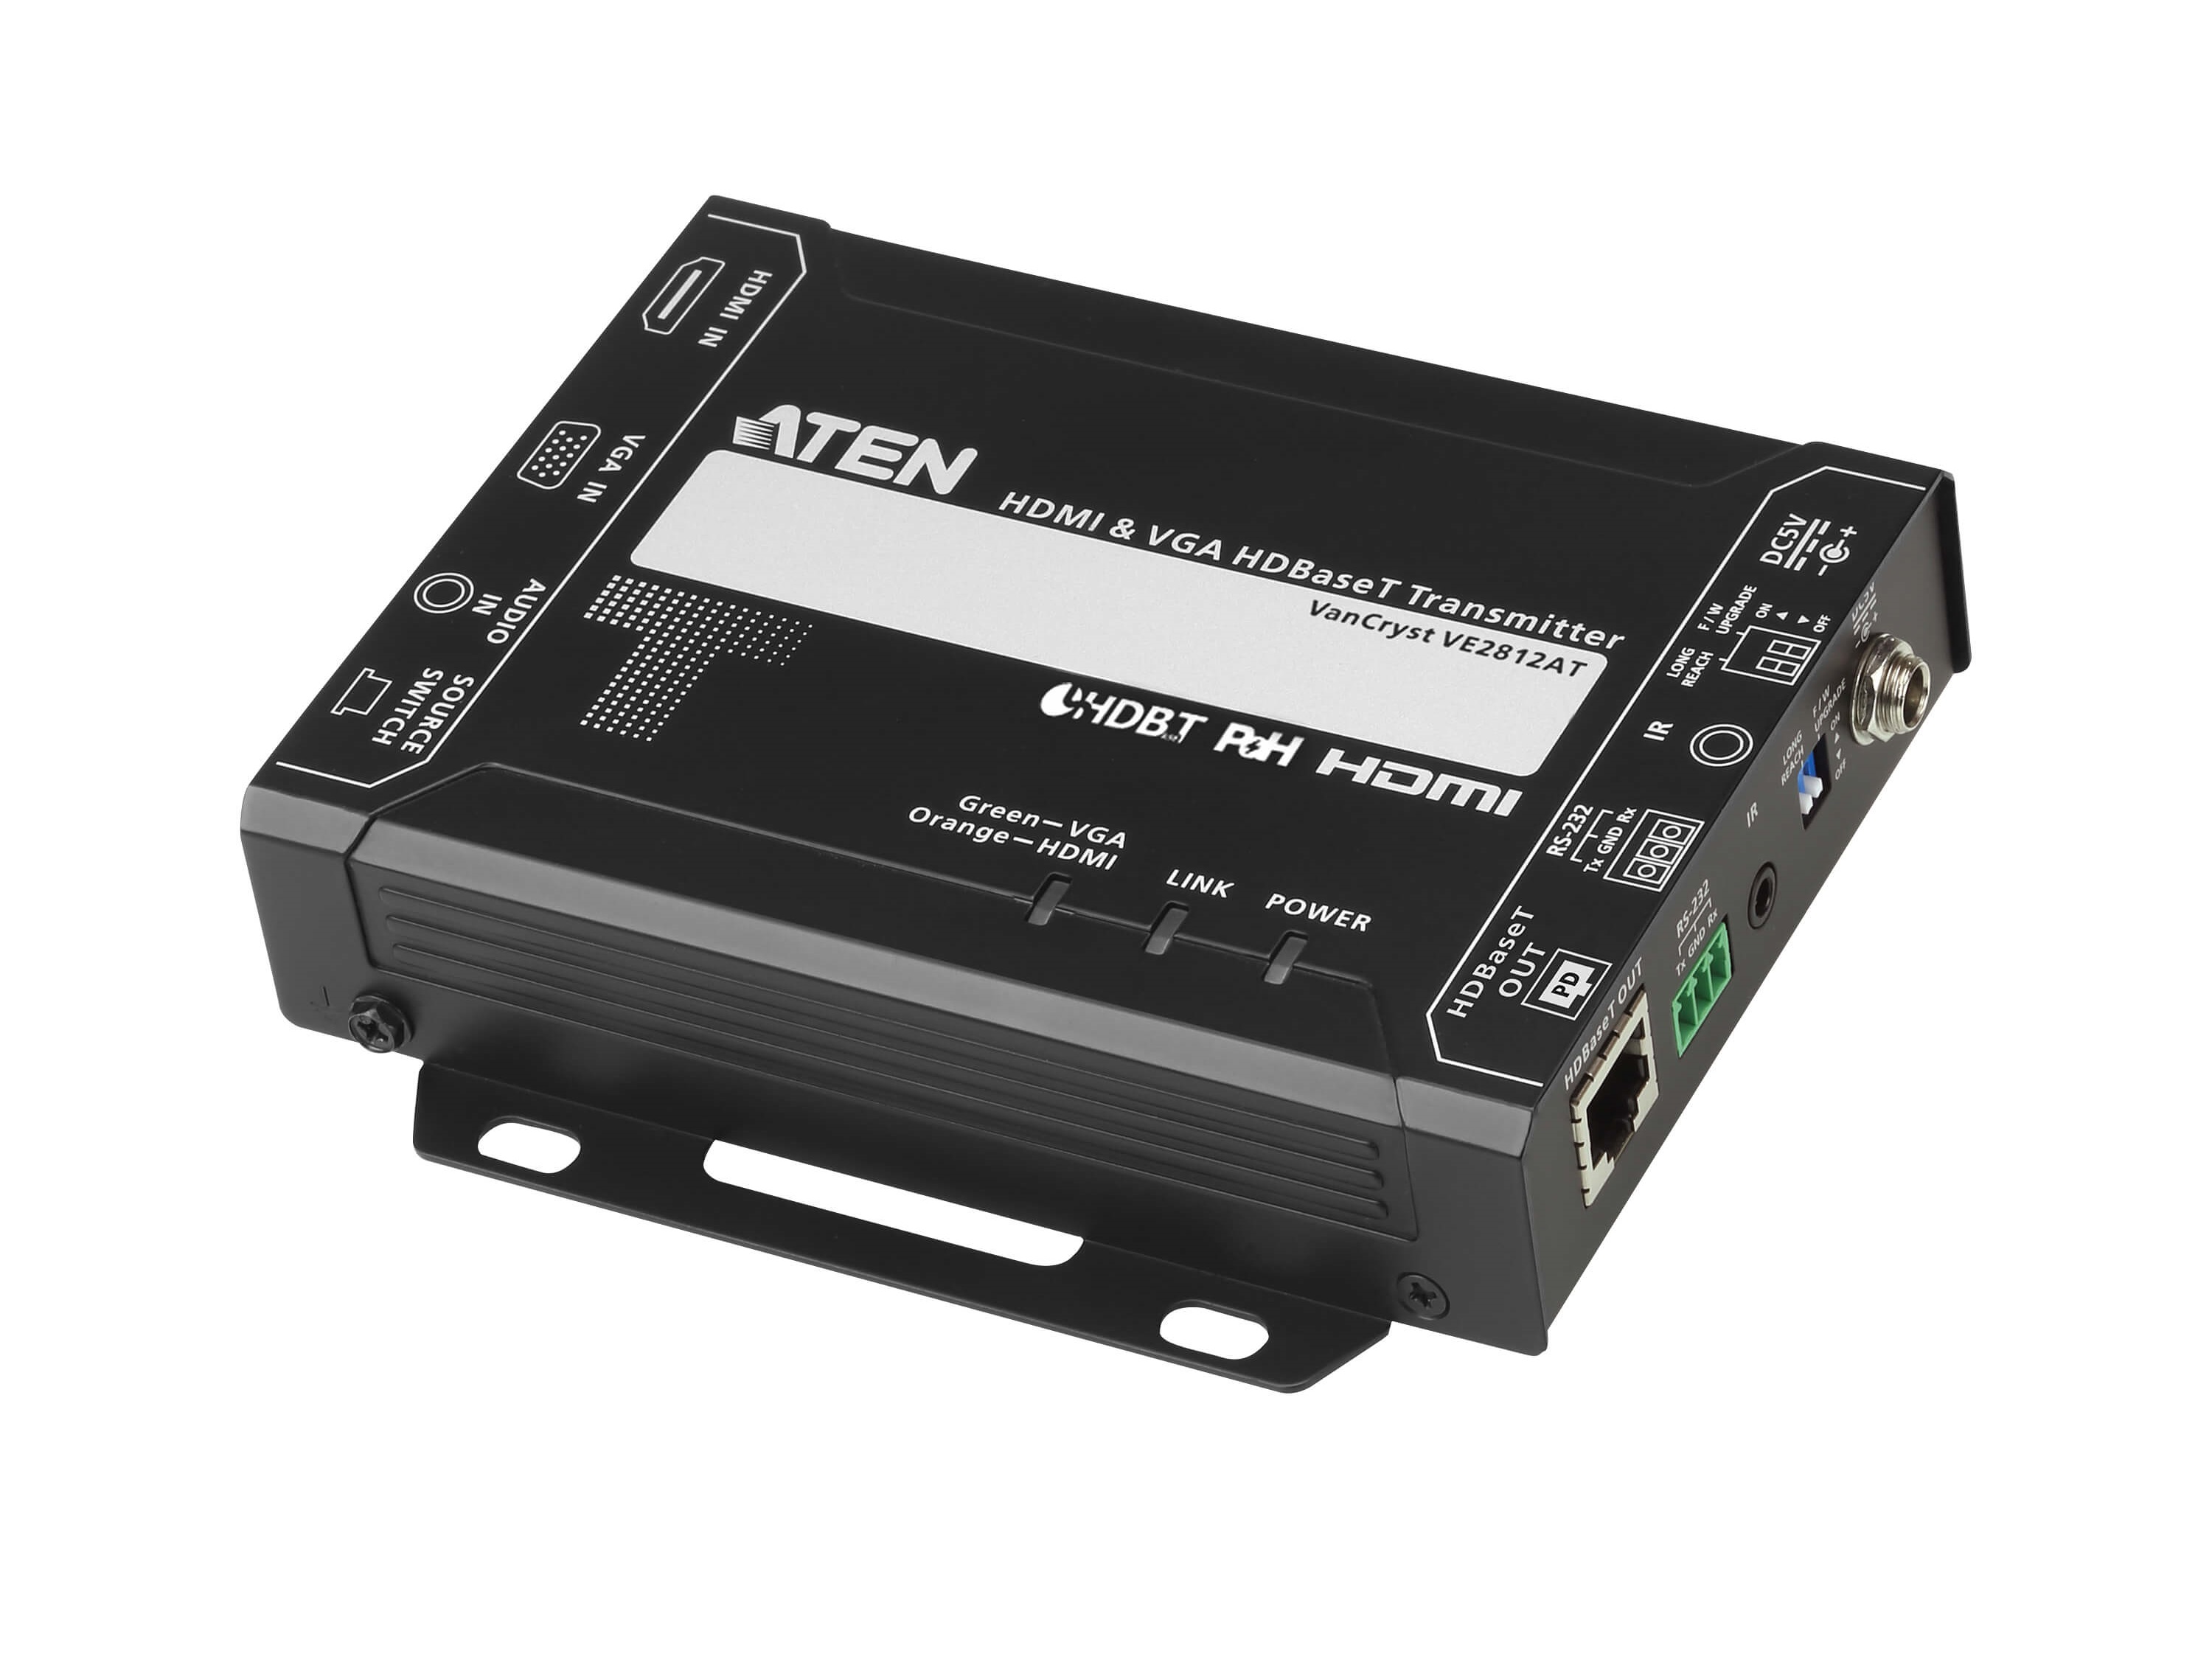 VE2812AT HDMI and VGA HDBaseT Transmitter with POH (4K@100m/HDBaseT Class A/PoH PD) by Aten